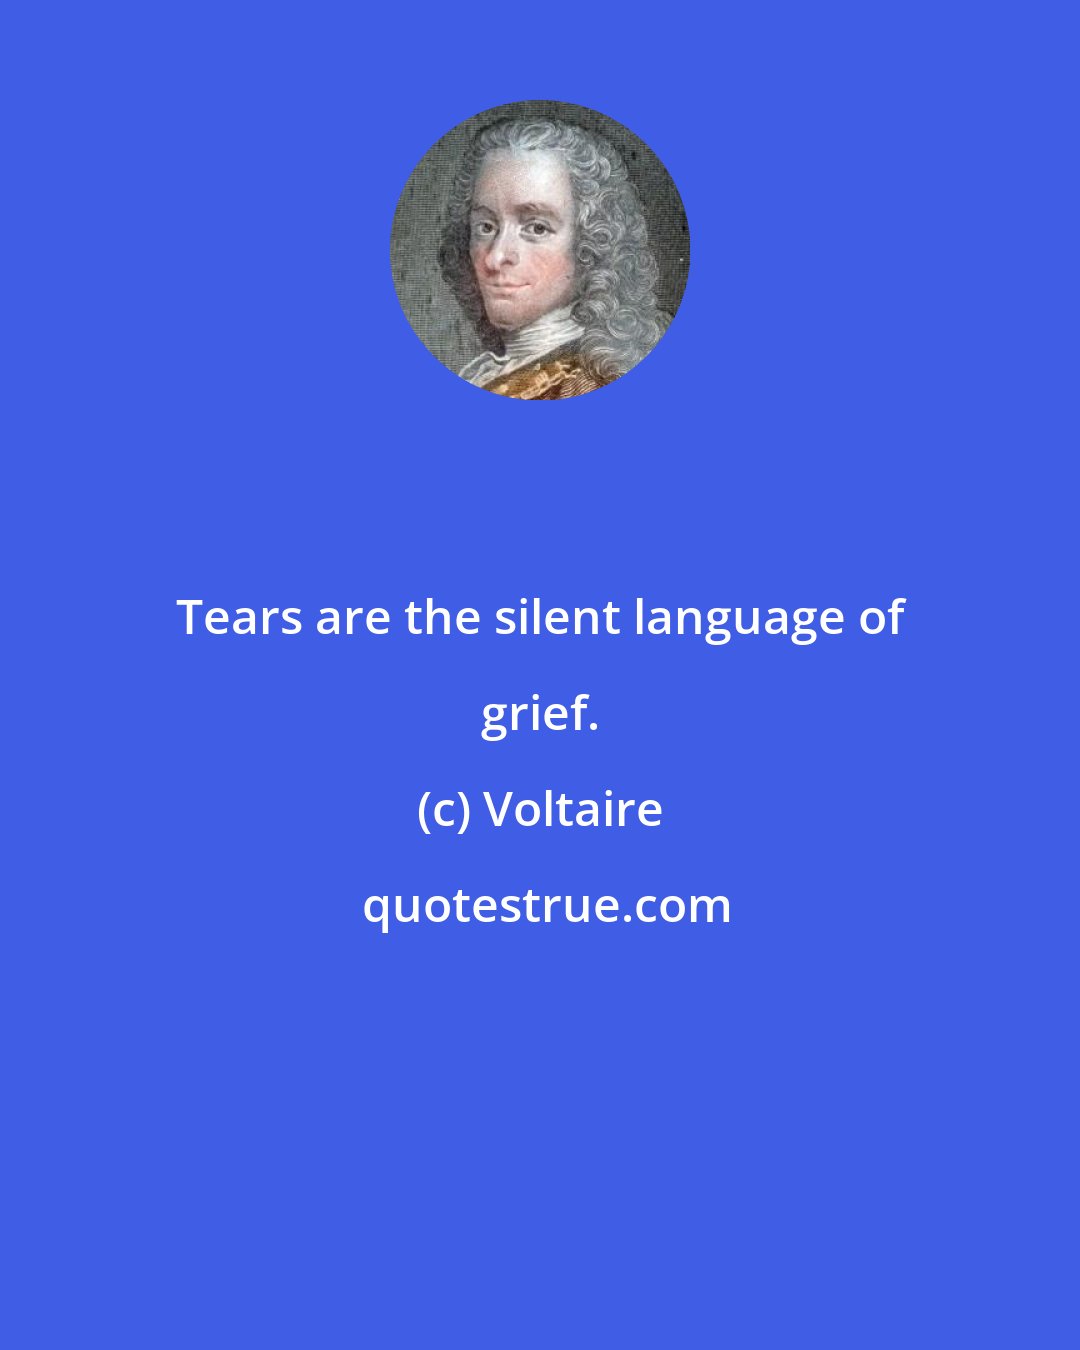 Voltaire: Tears are the silent language of grief.